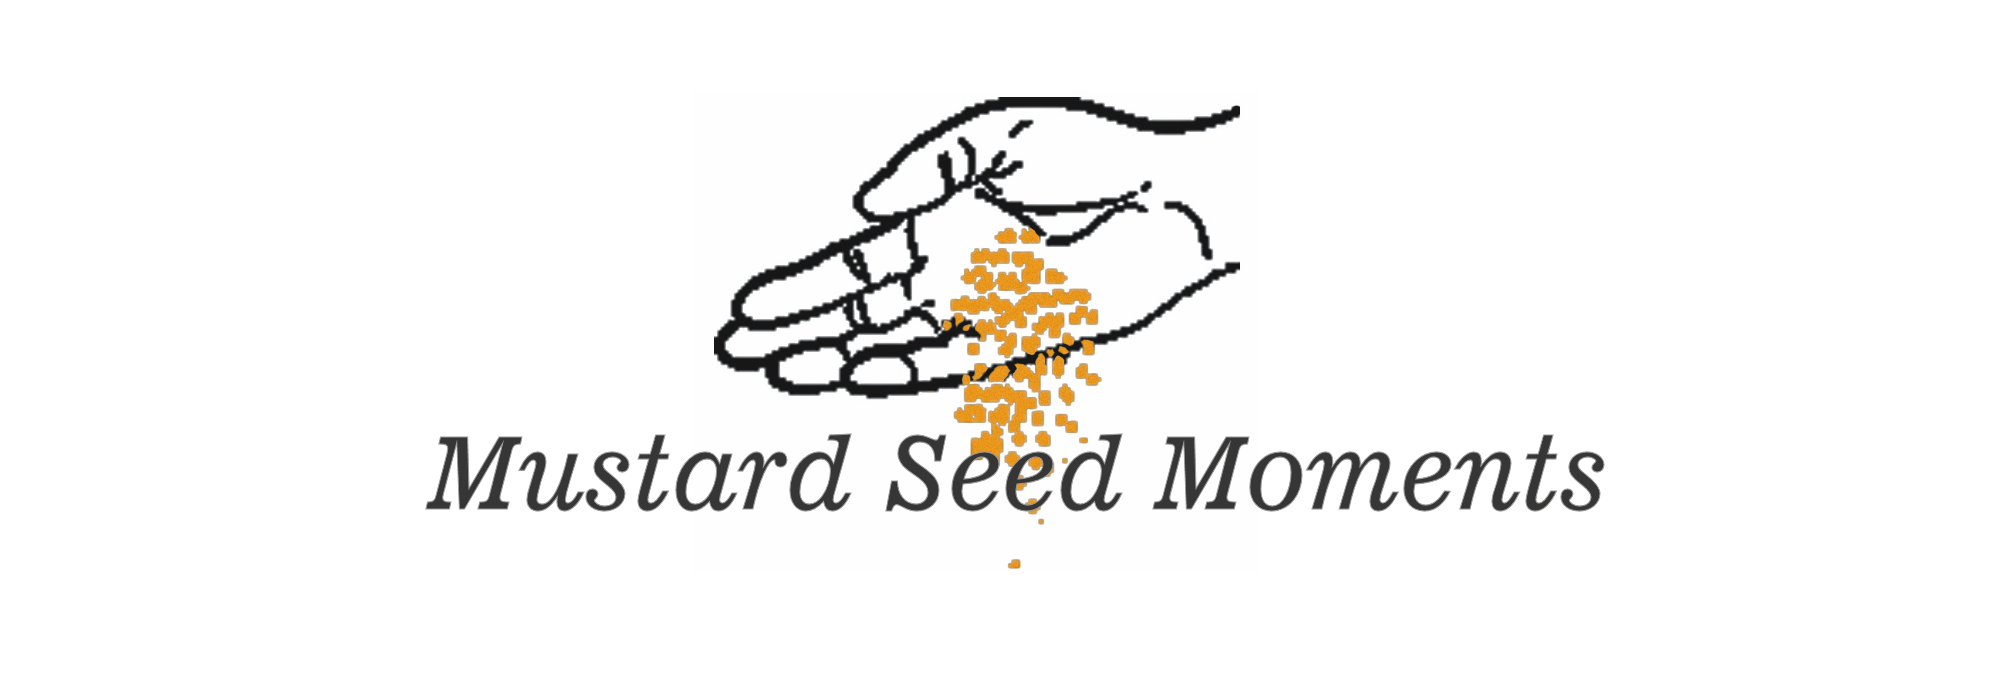 Mustard Seed Moments